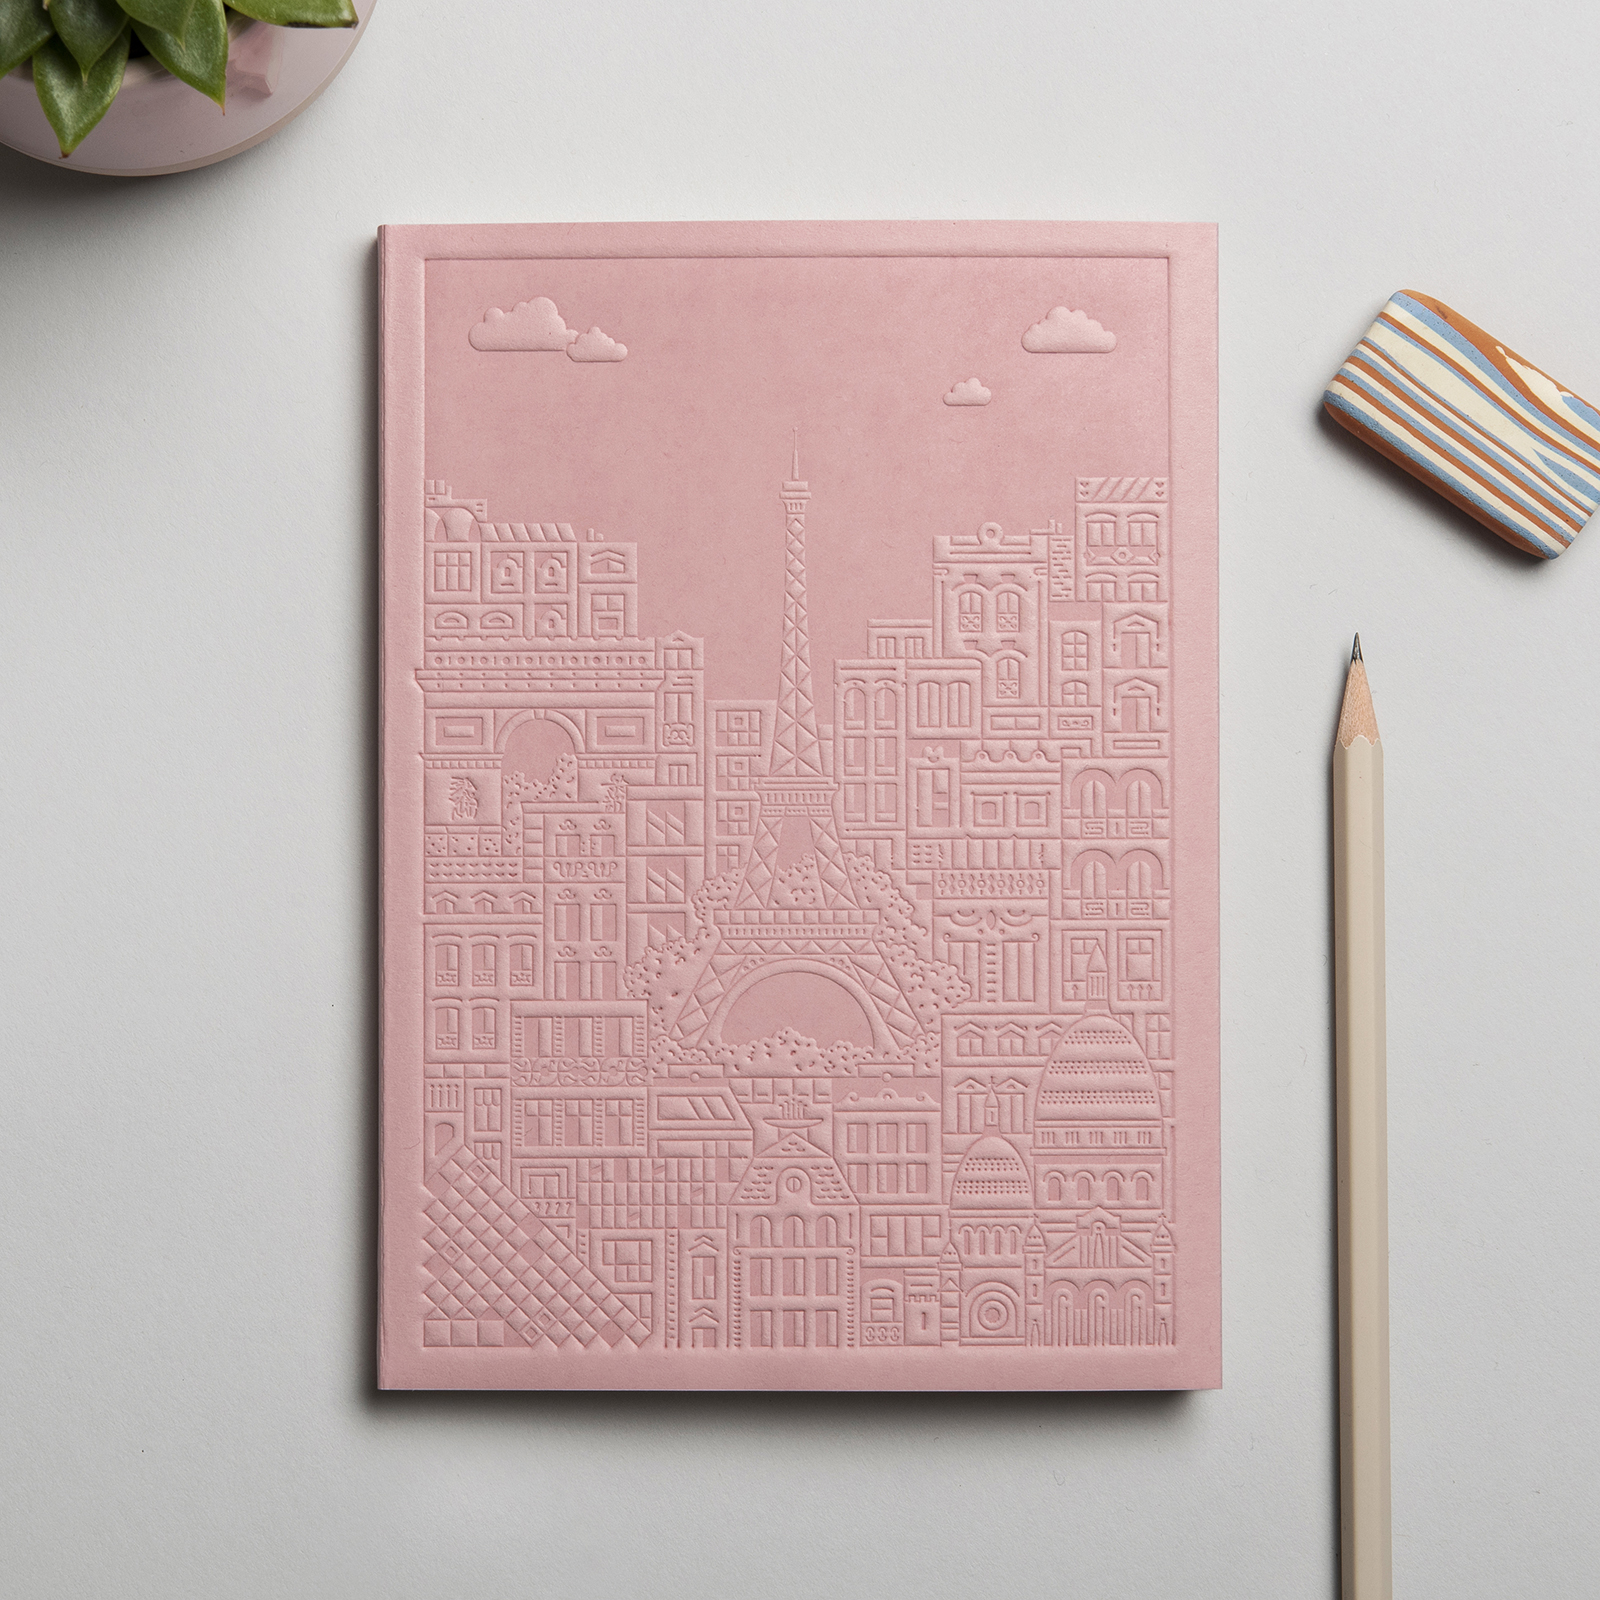 The Paris Notebook by The City Works